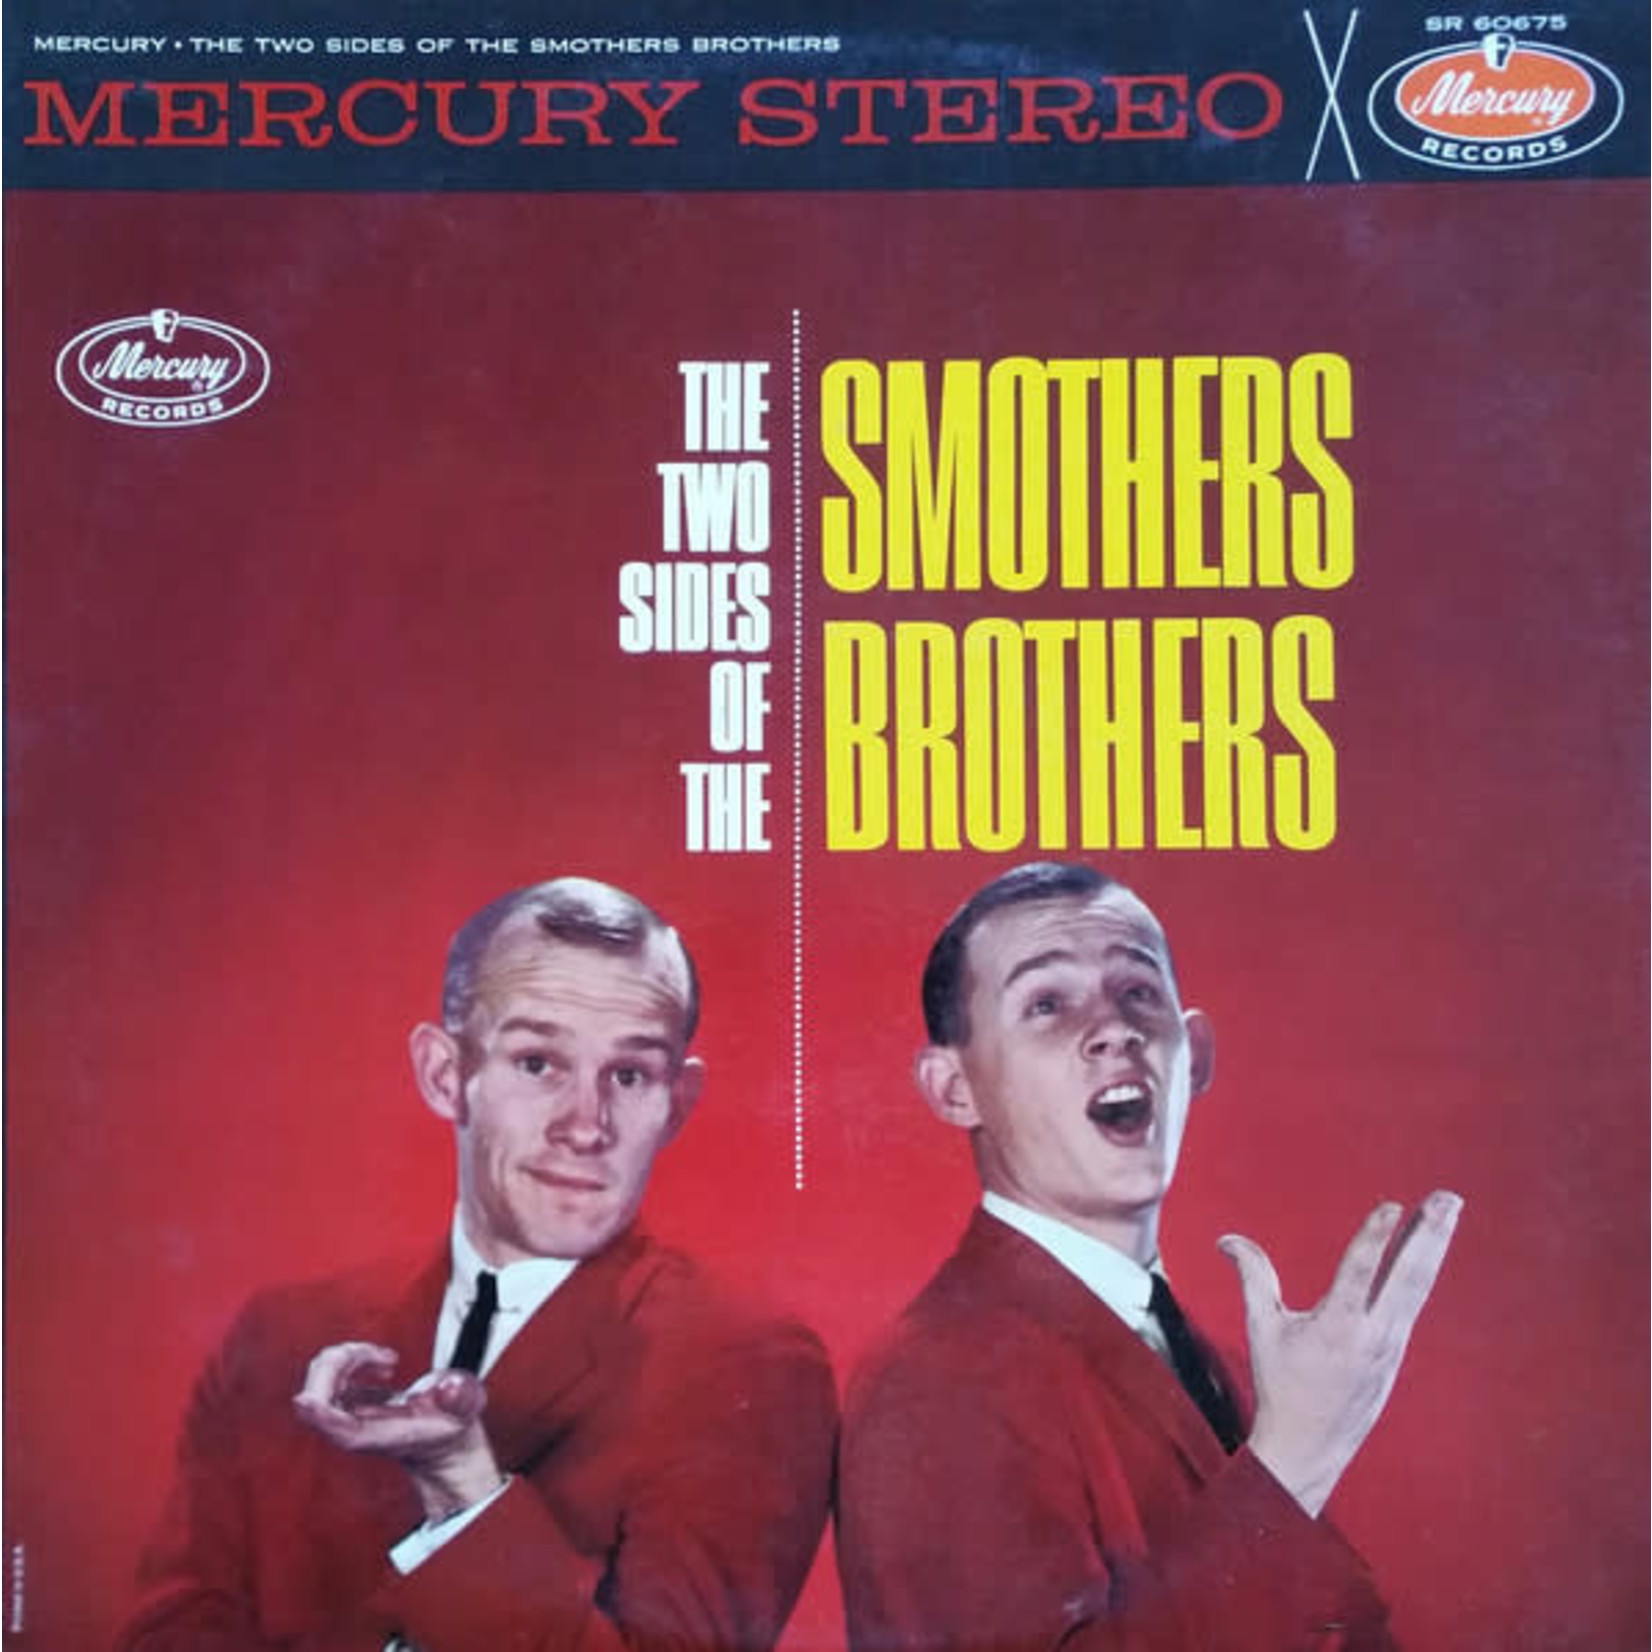 [Vintage] Smothers Brothers - Two Sides of